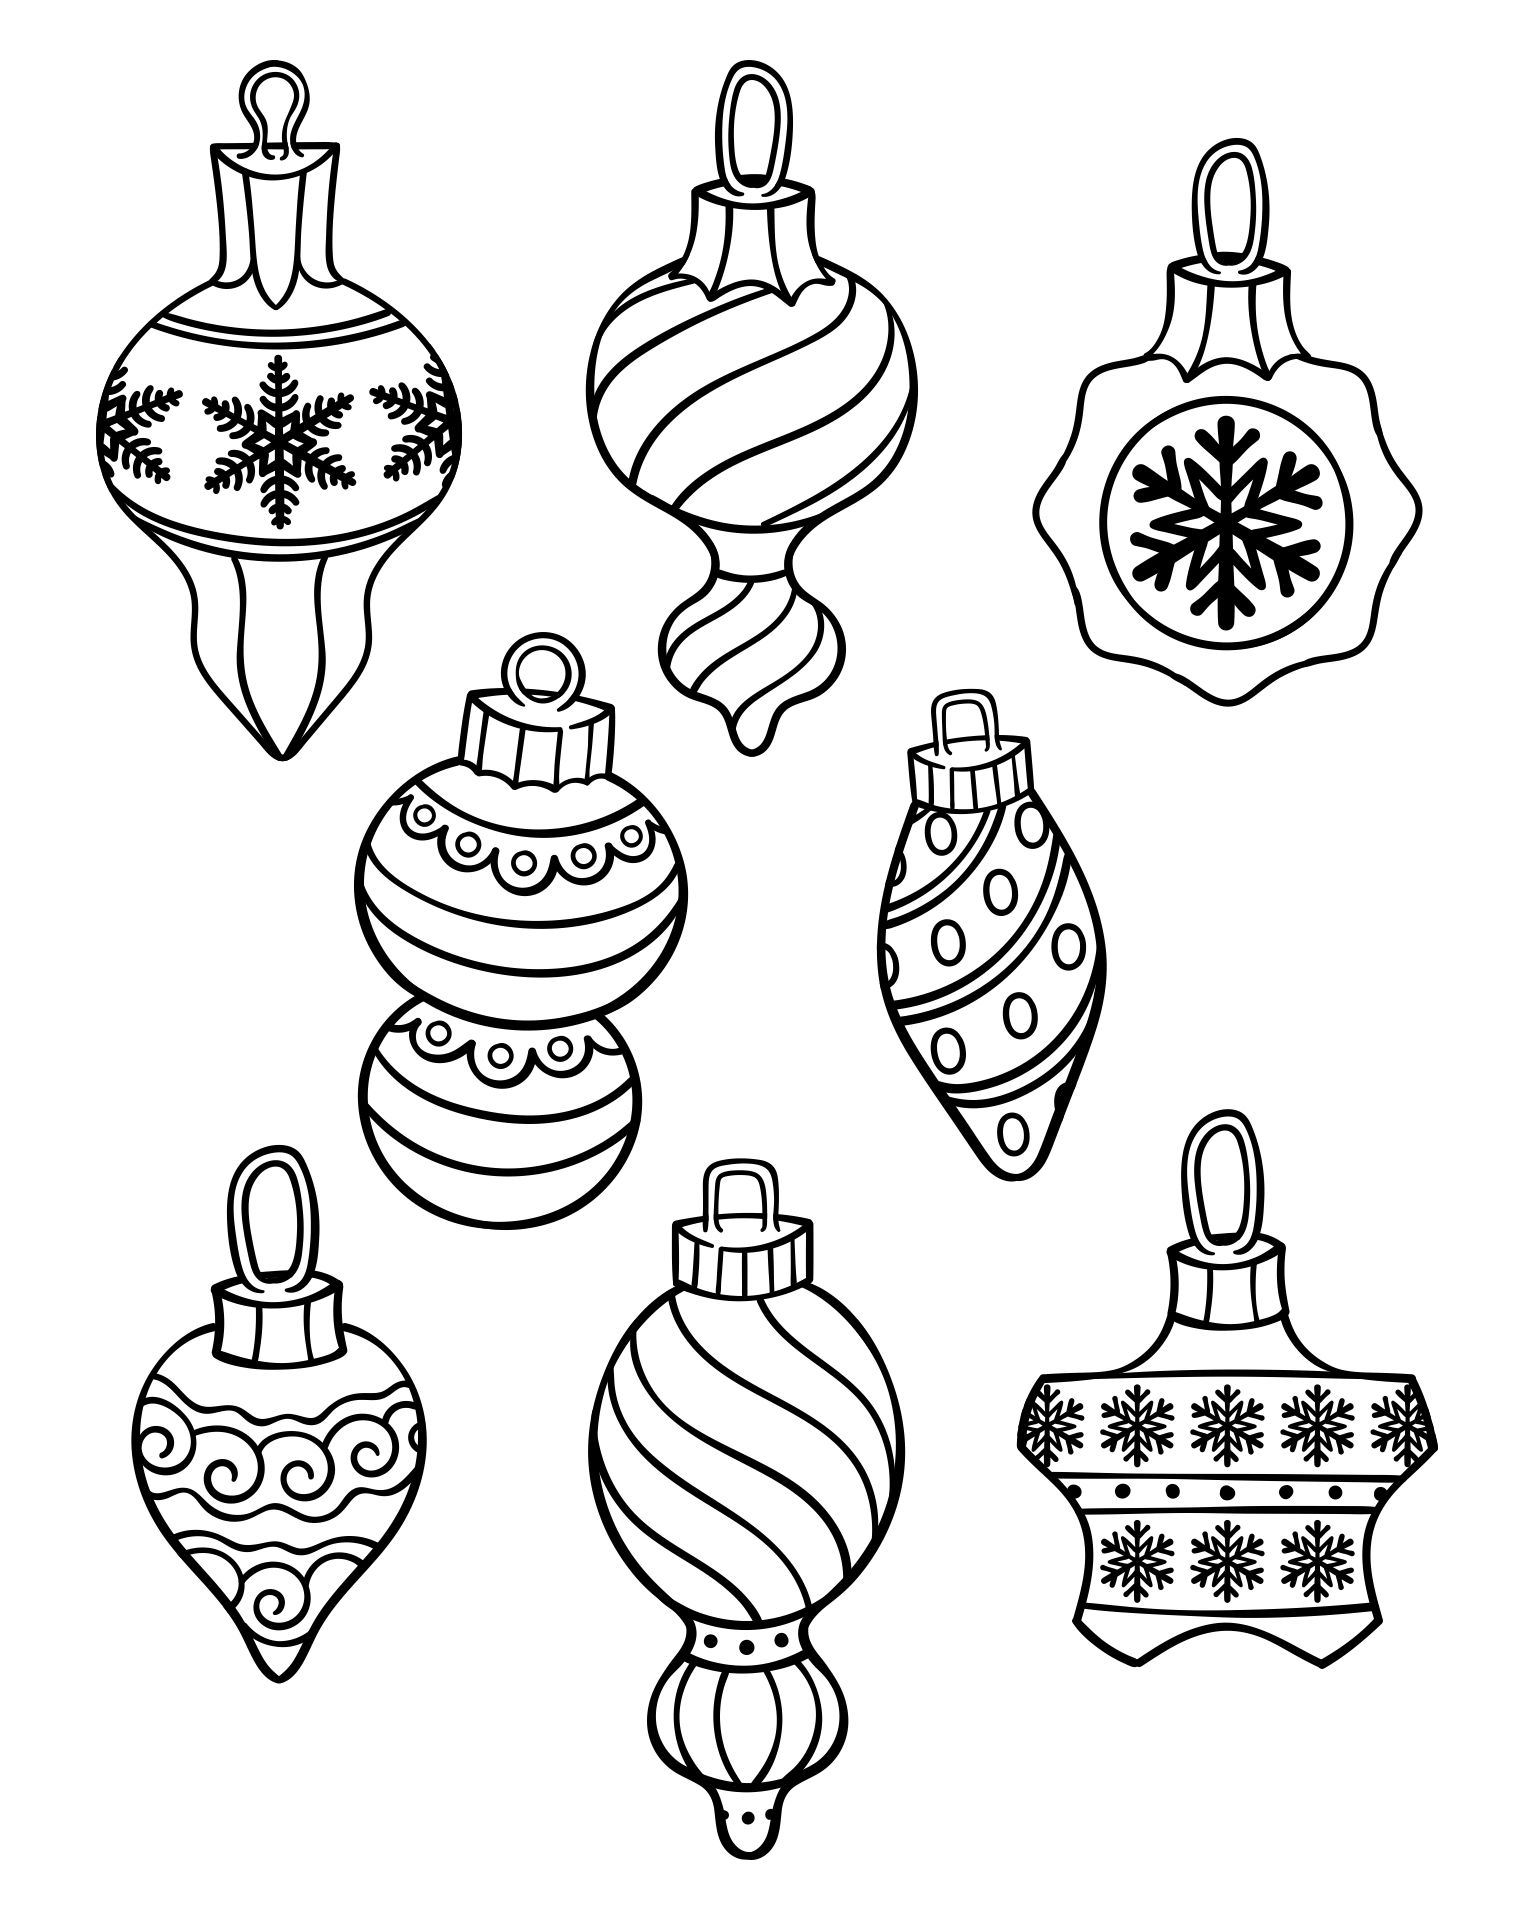 Printable Christmas Bauble Ornament Coloring Page